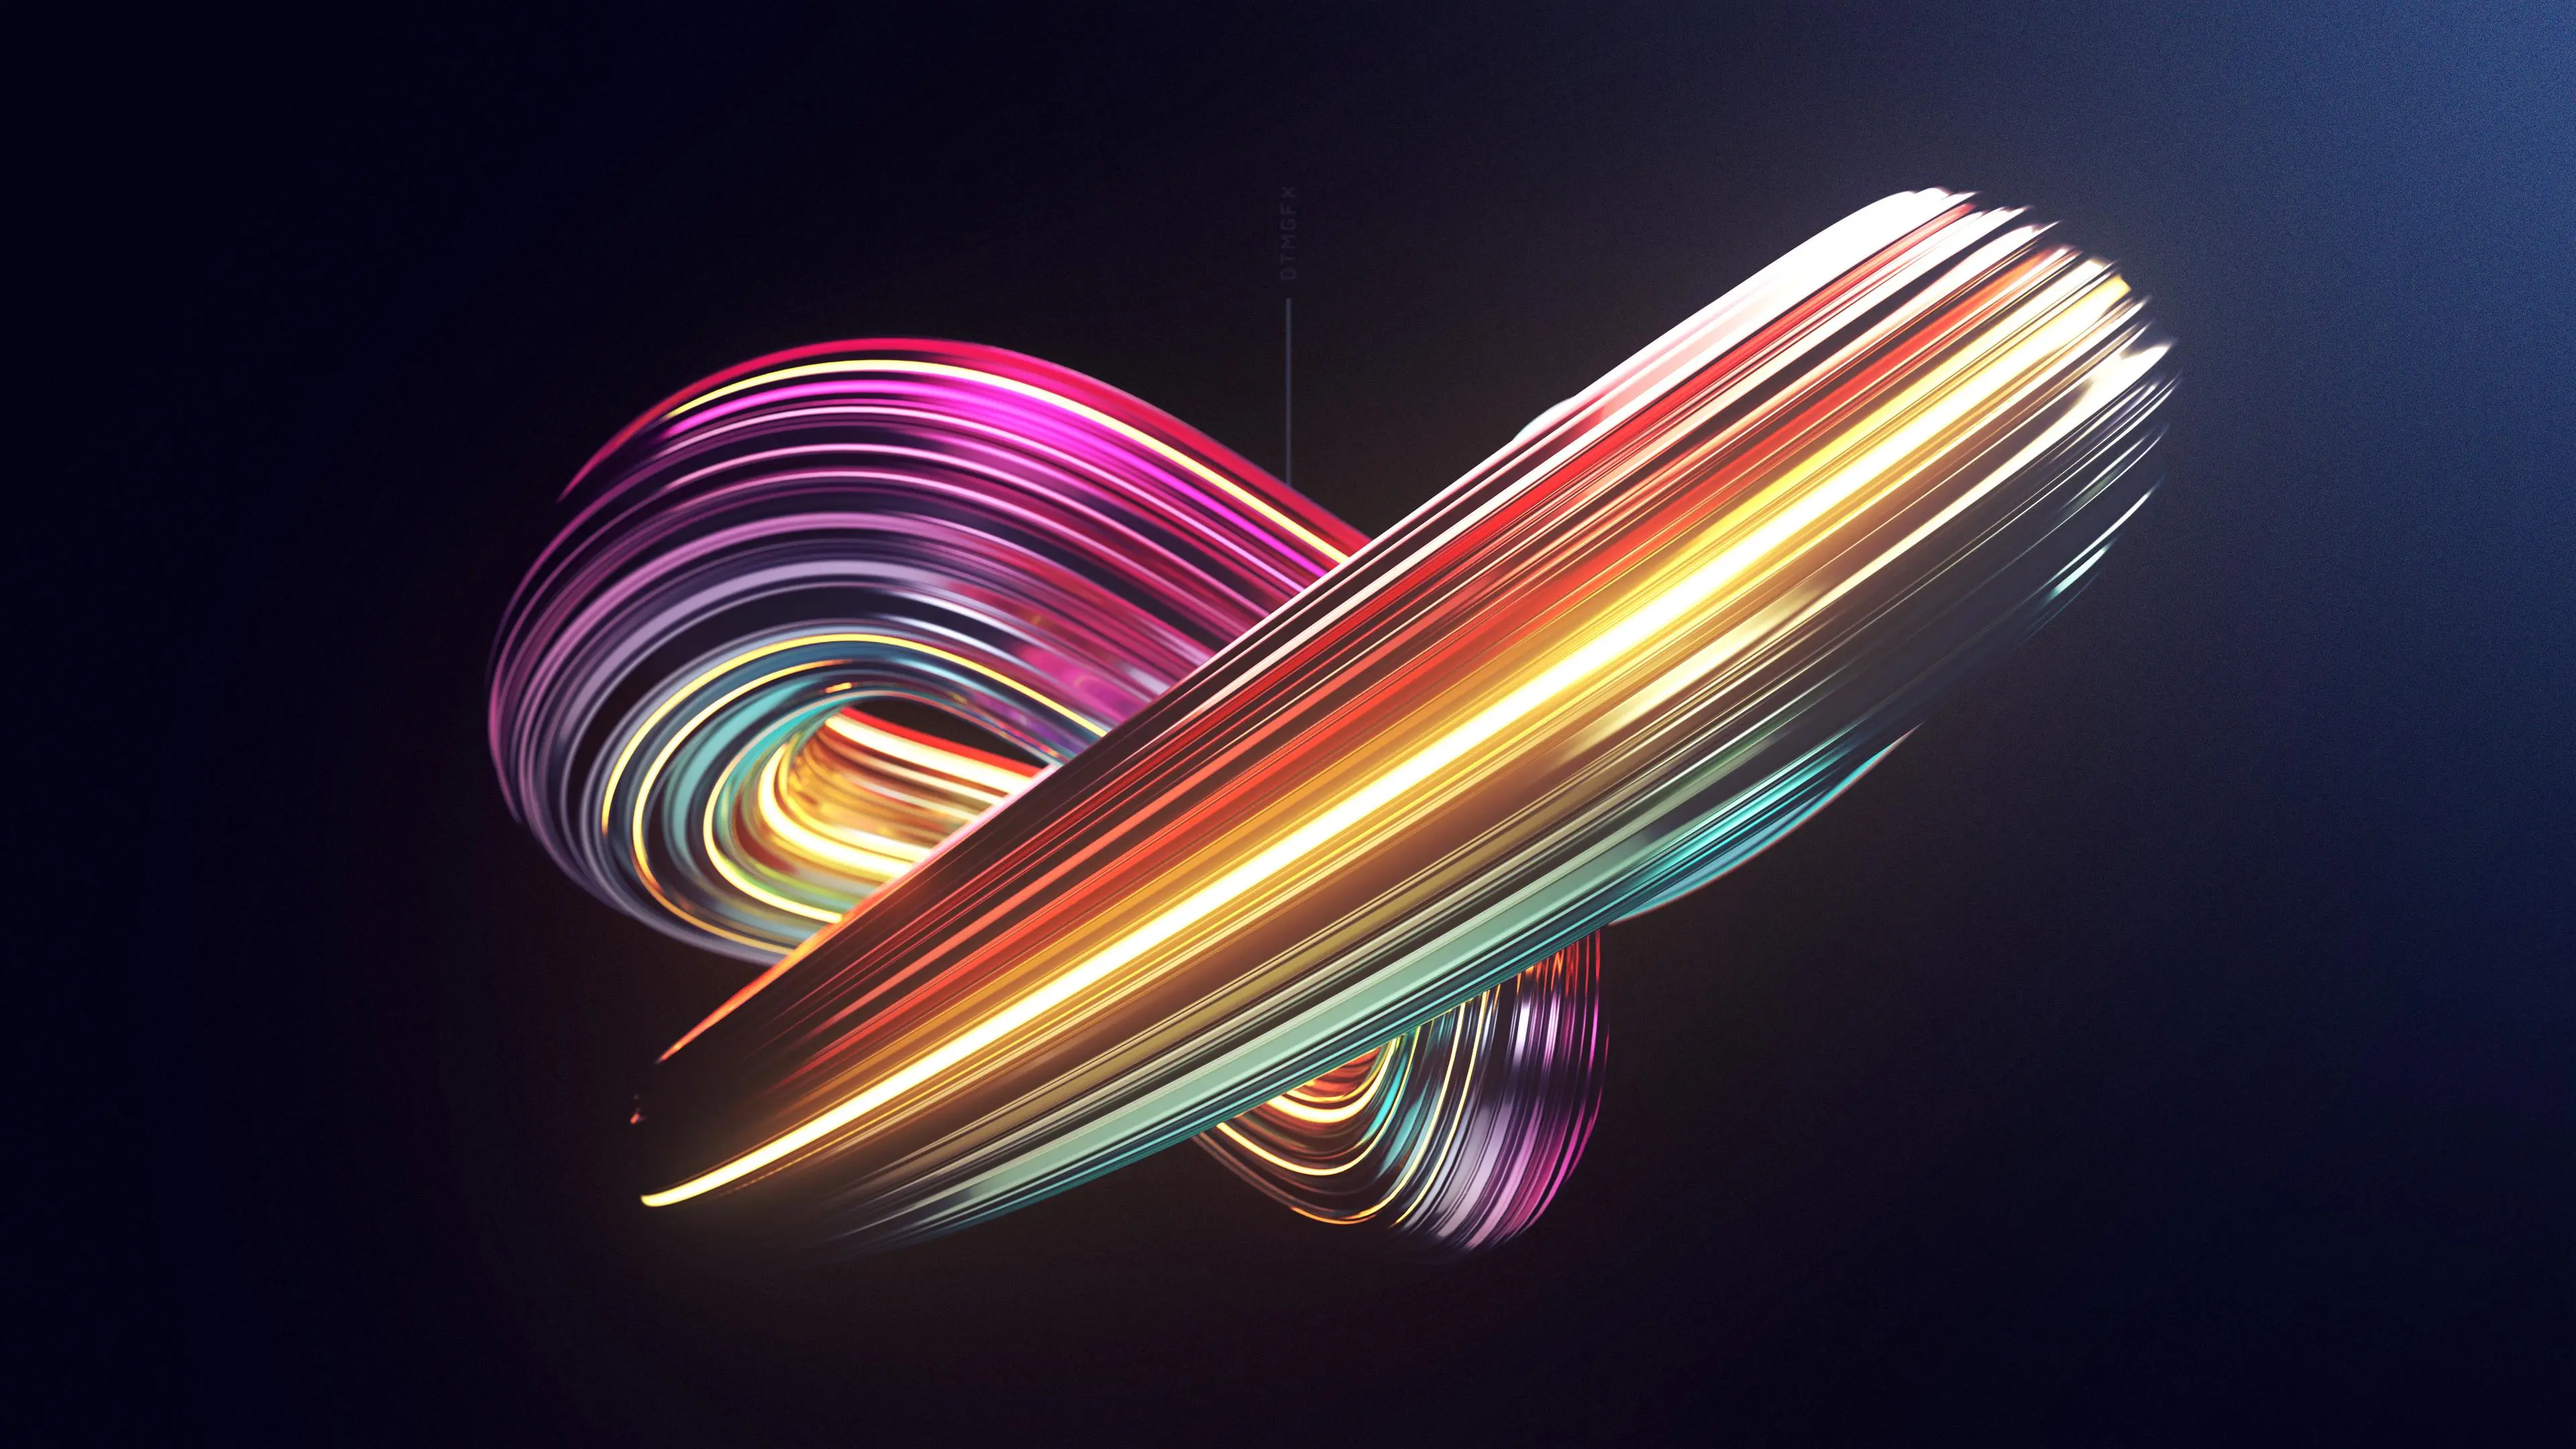 abstract sweep and swirl 4k 1553075199 - Abstract Sweep And Swirl 4k - shapes wallpapers, hd-wallpapers, digital art wallpapers, behance wallpapers, abstract wallpapers, 4k-wallpapers